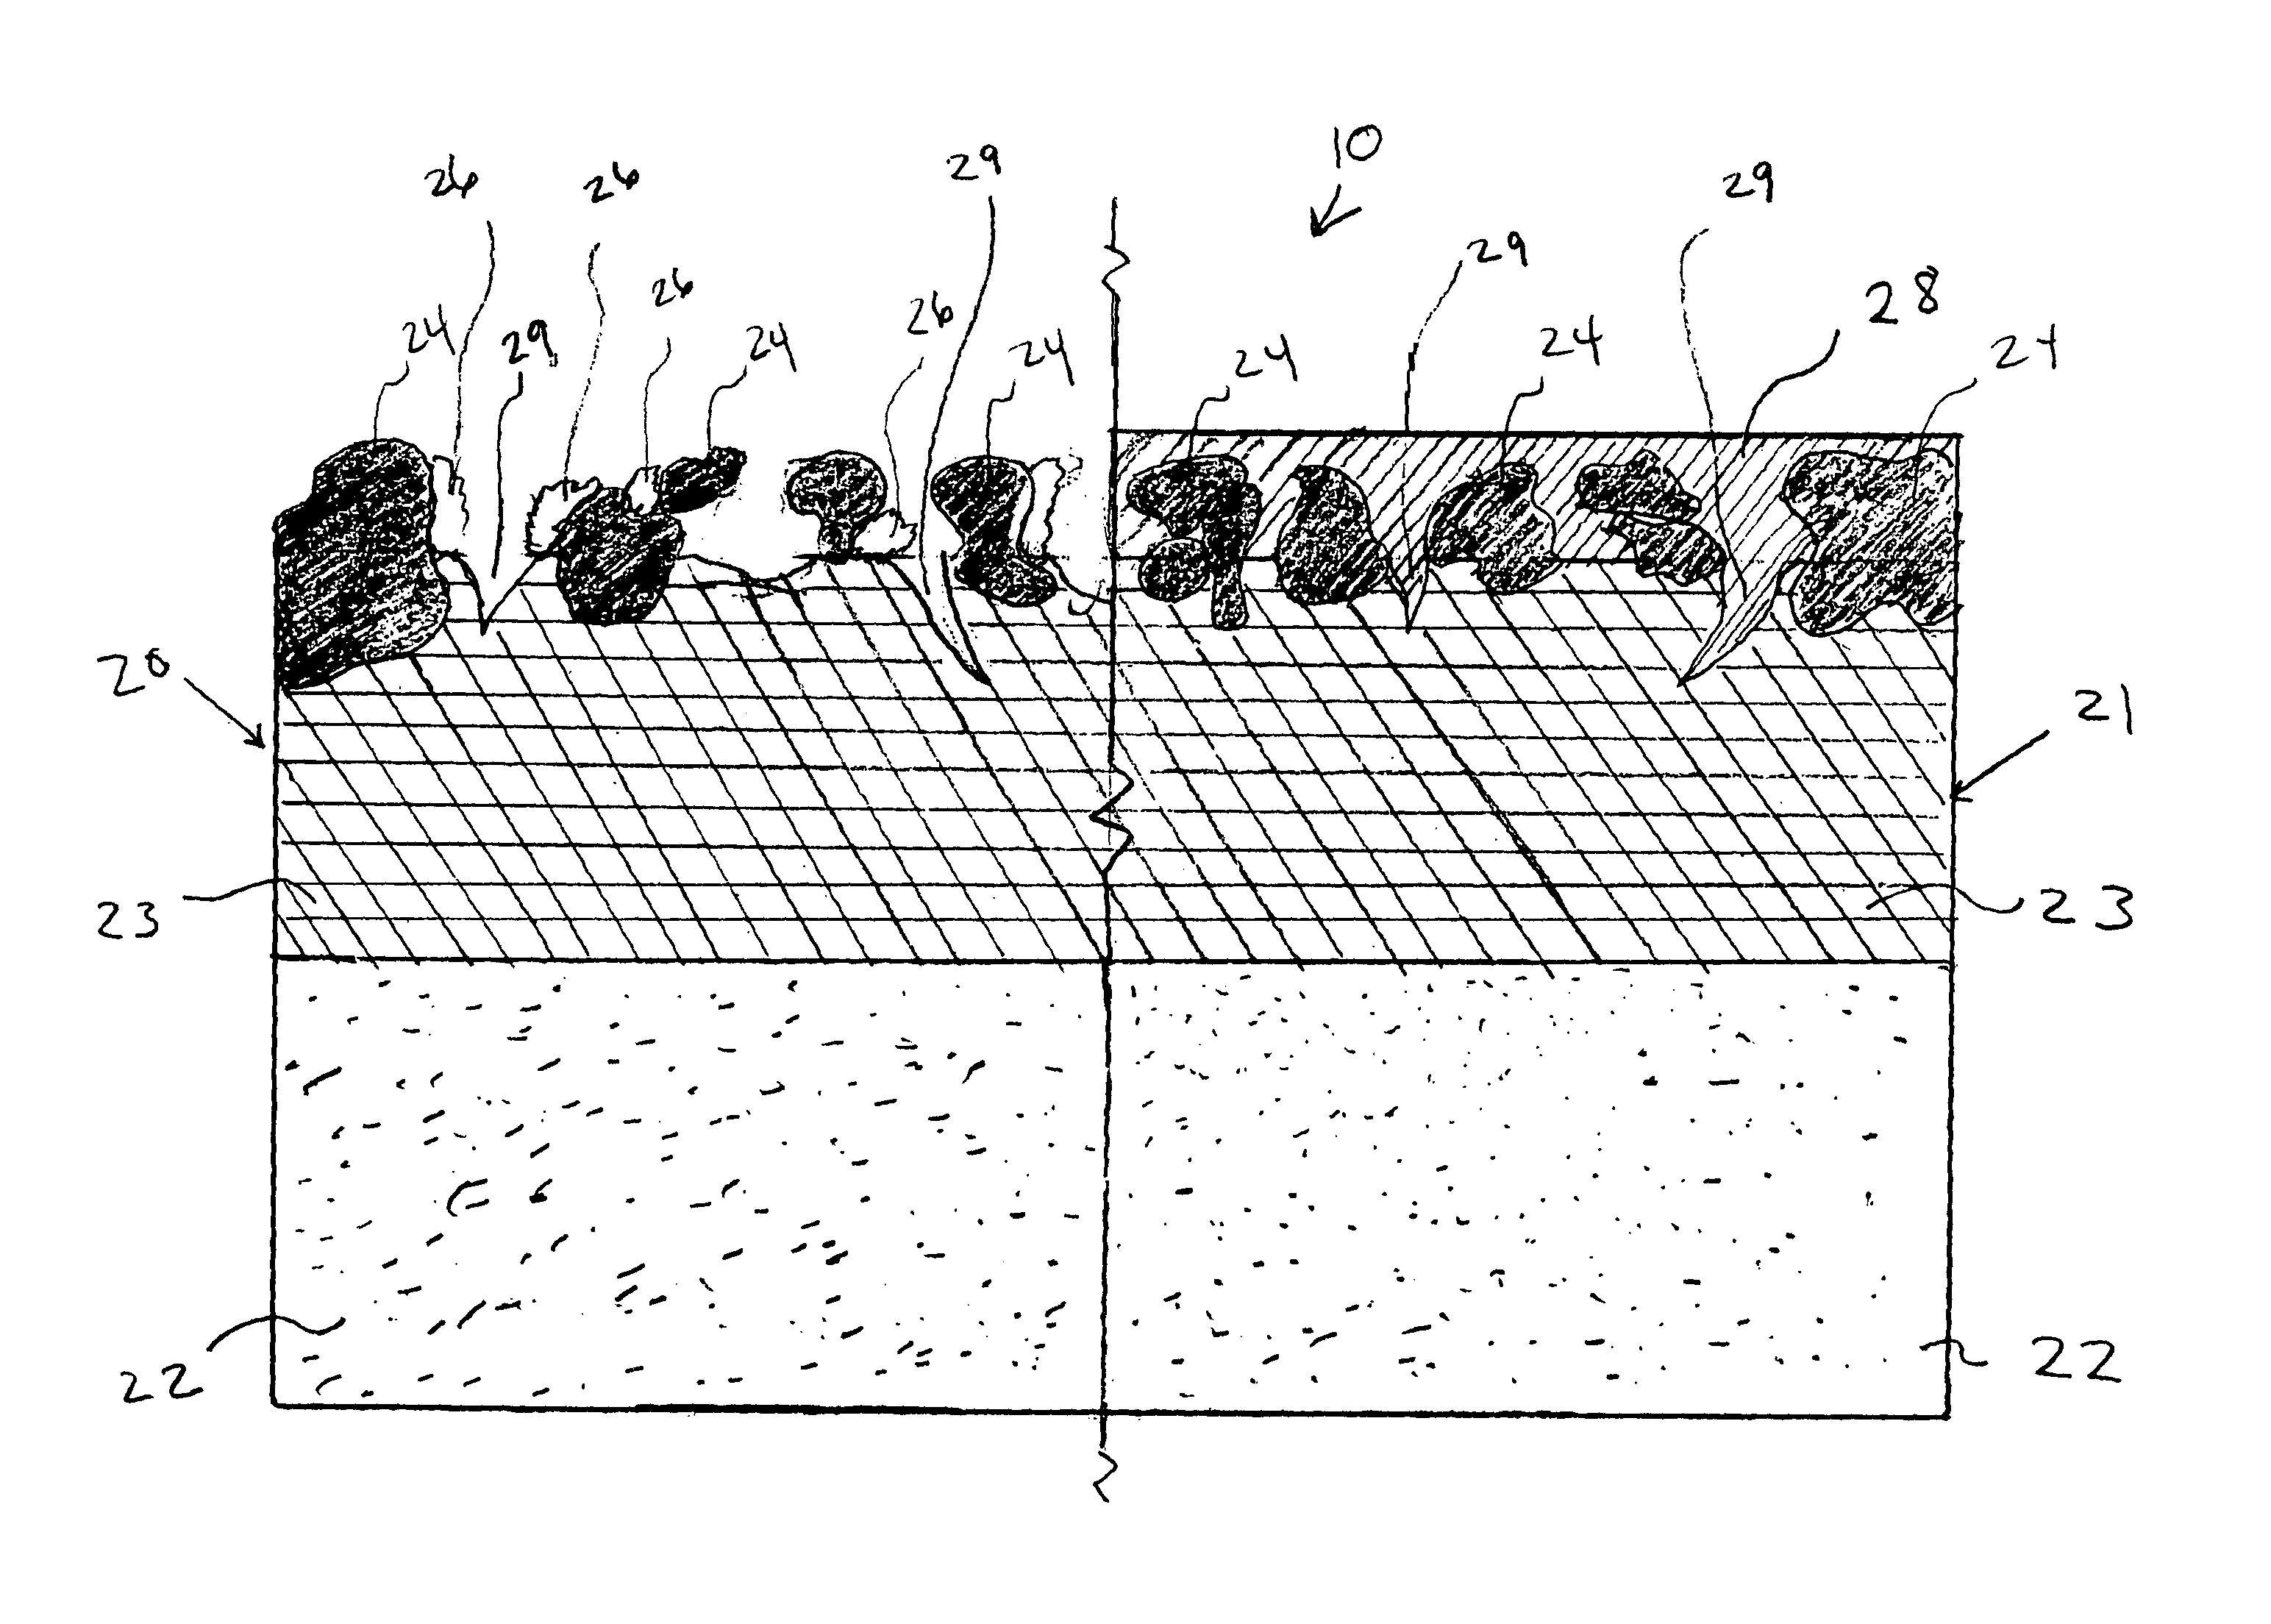 Composition and method of sealing and protecting asphalt shingles or other porous roofing and construction materials